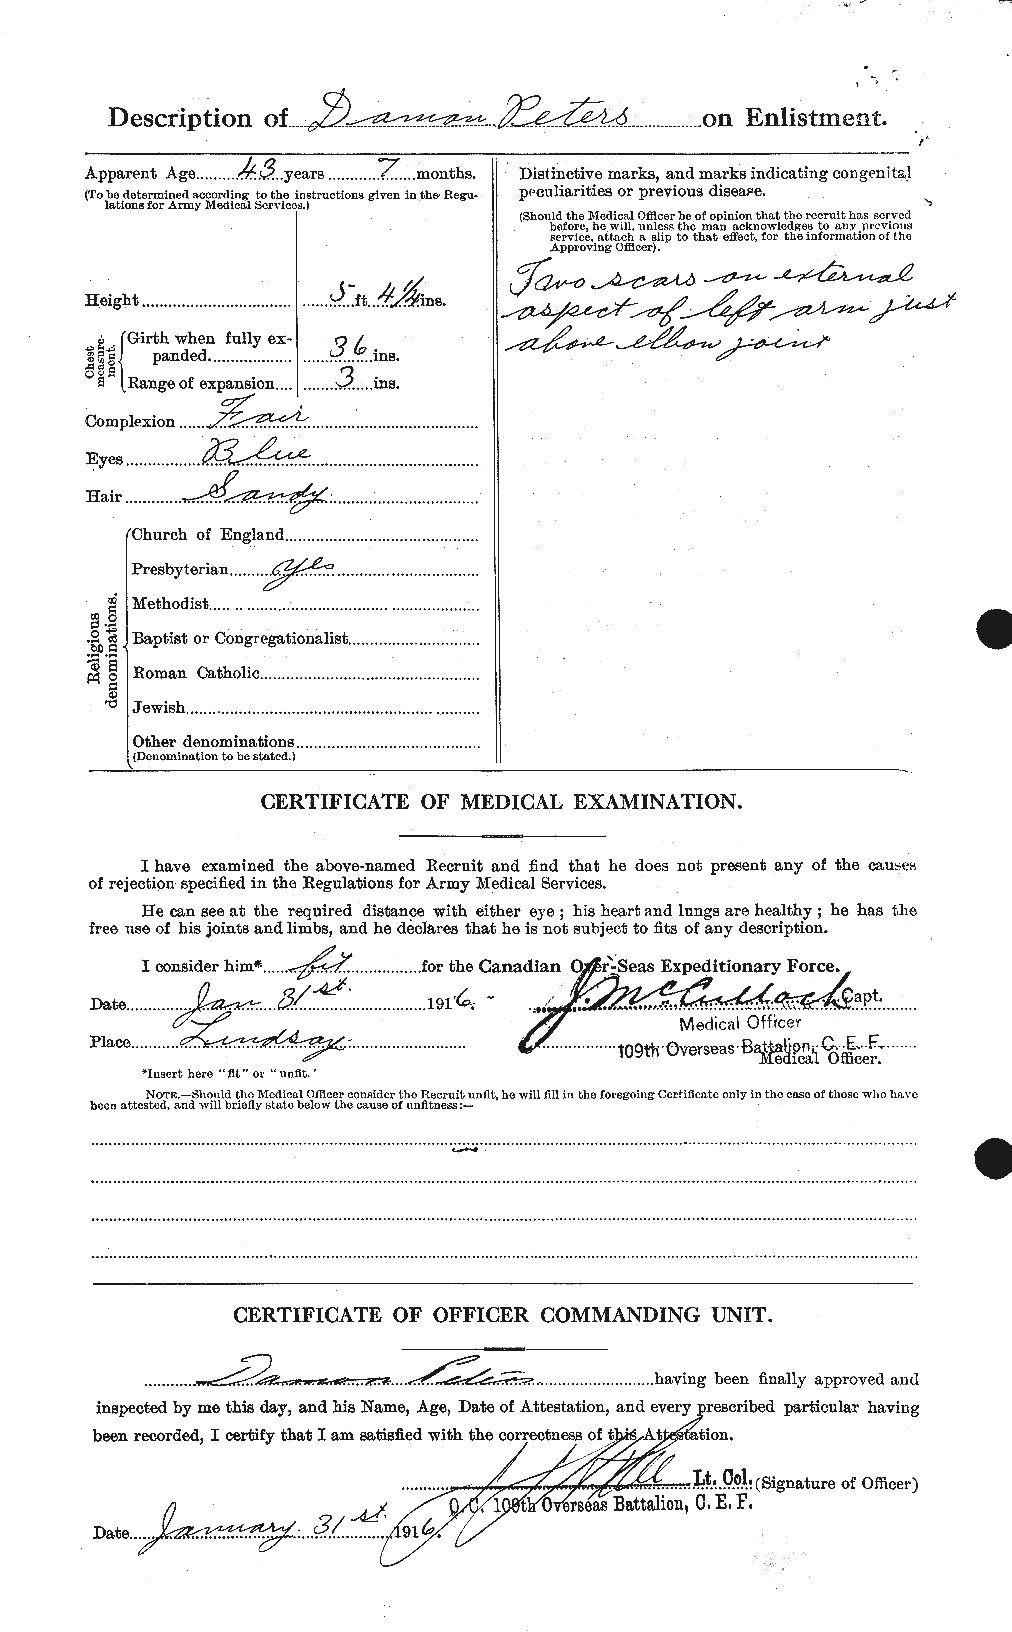 Personnel Records of the First World War - CEF 575381b